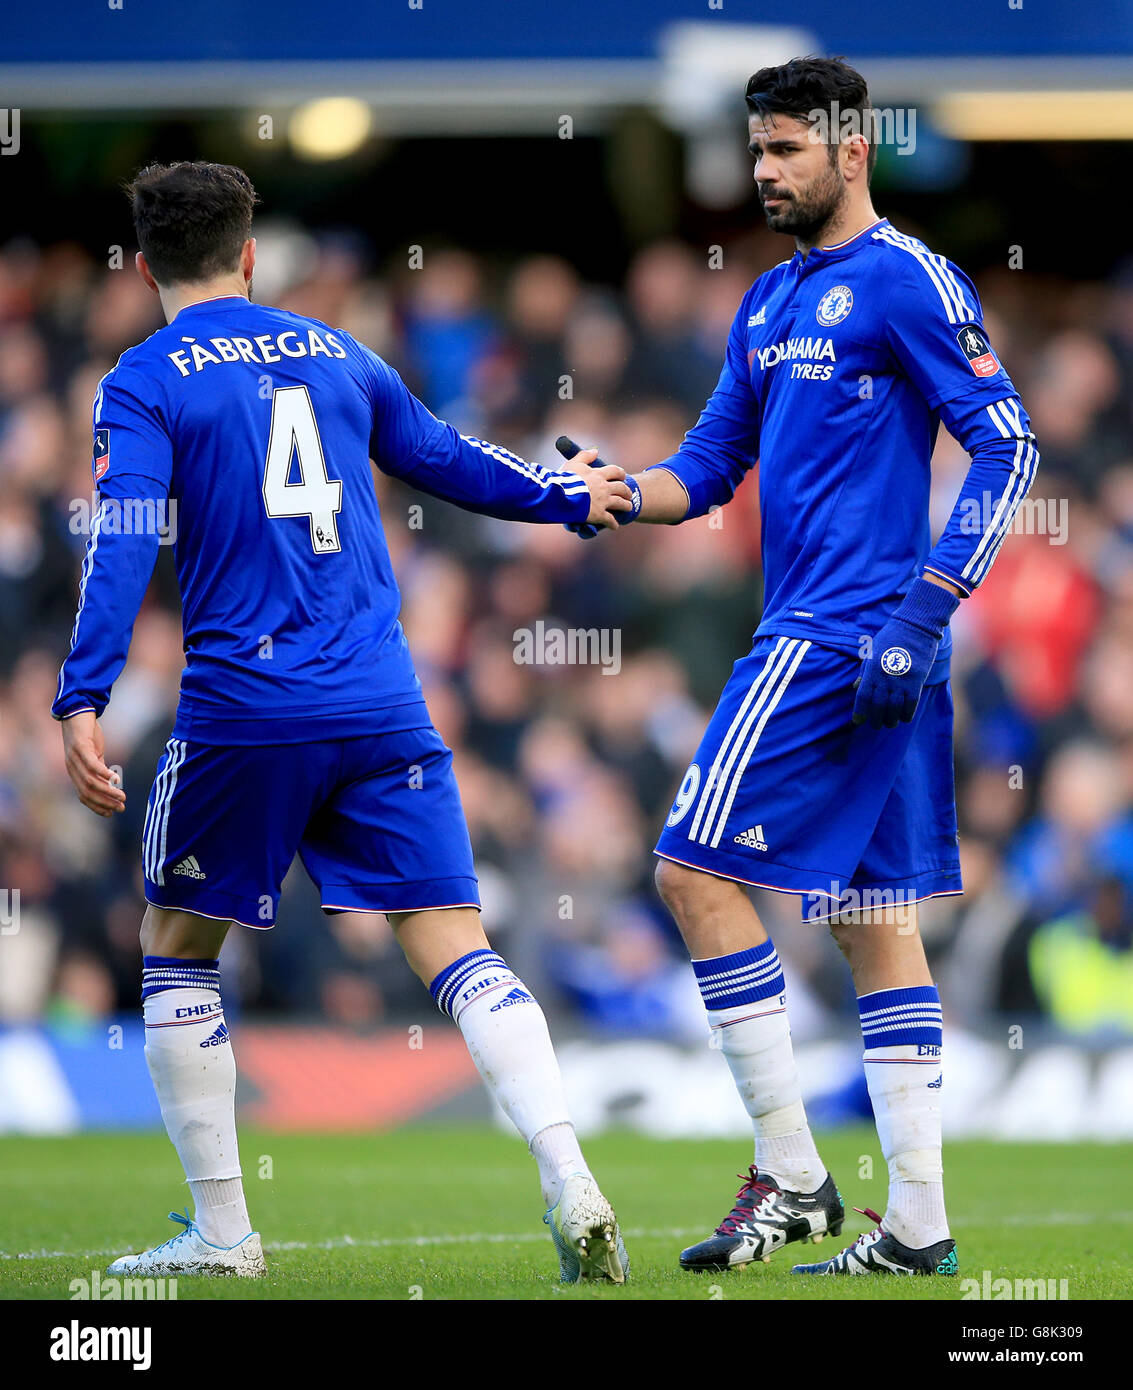 Chelsea's Diego Costa (right) celebrates scoring their first goal of the game with team-mate Francesc Fabregas during the Emirates FA Cup, third round match at Stamford Bridge, London. Stock Photo